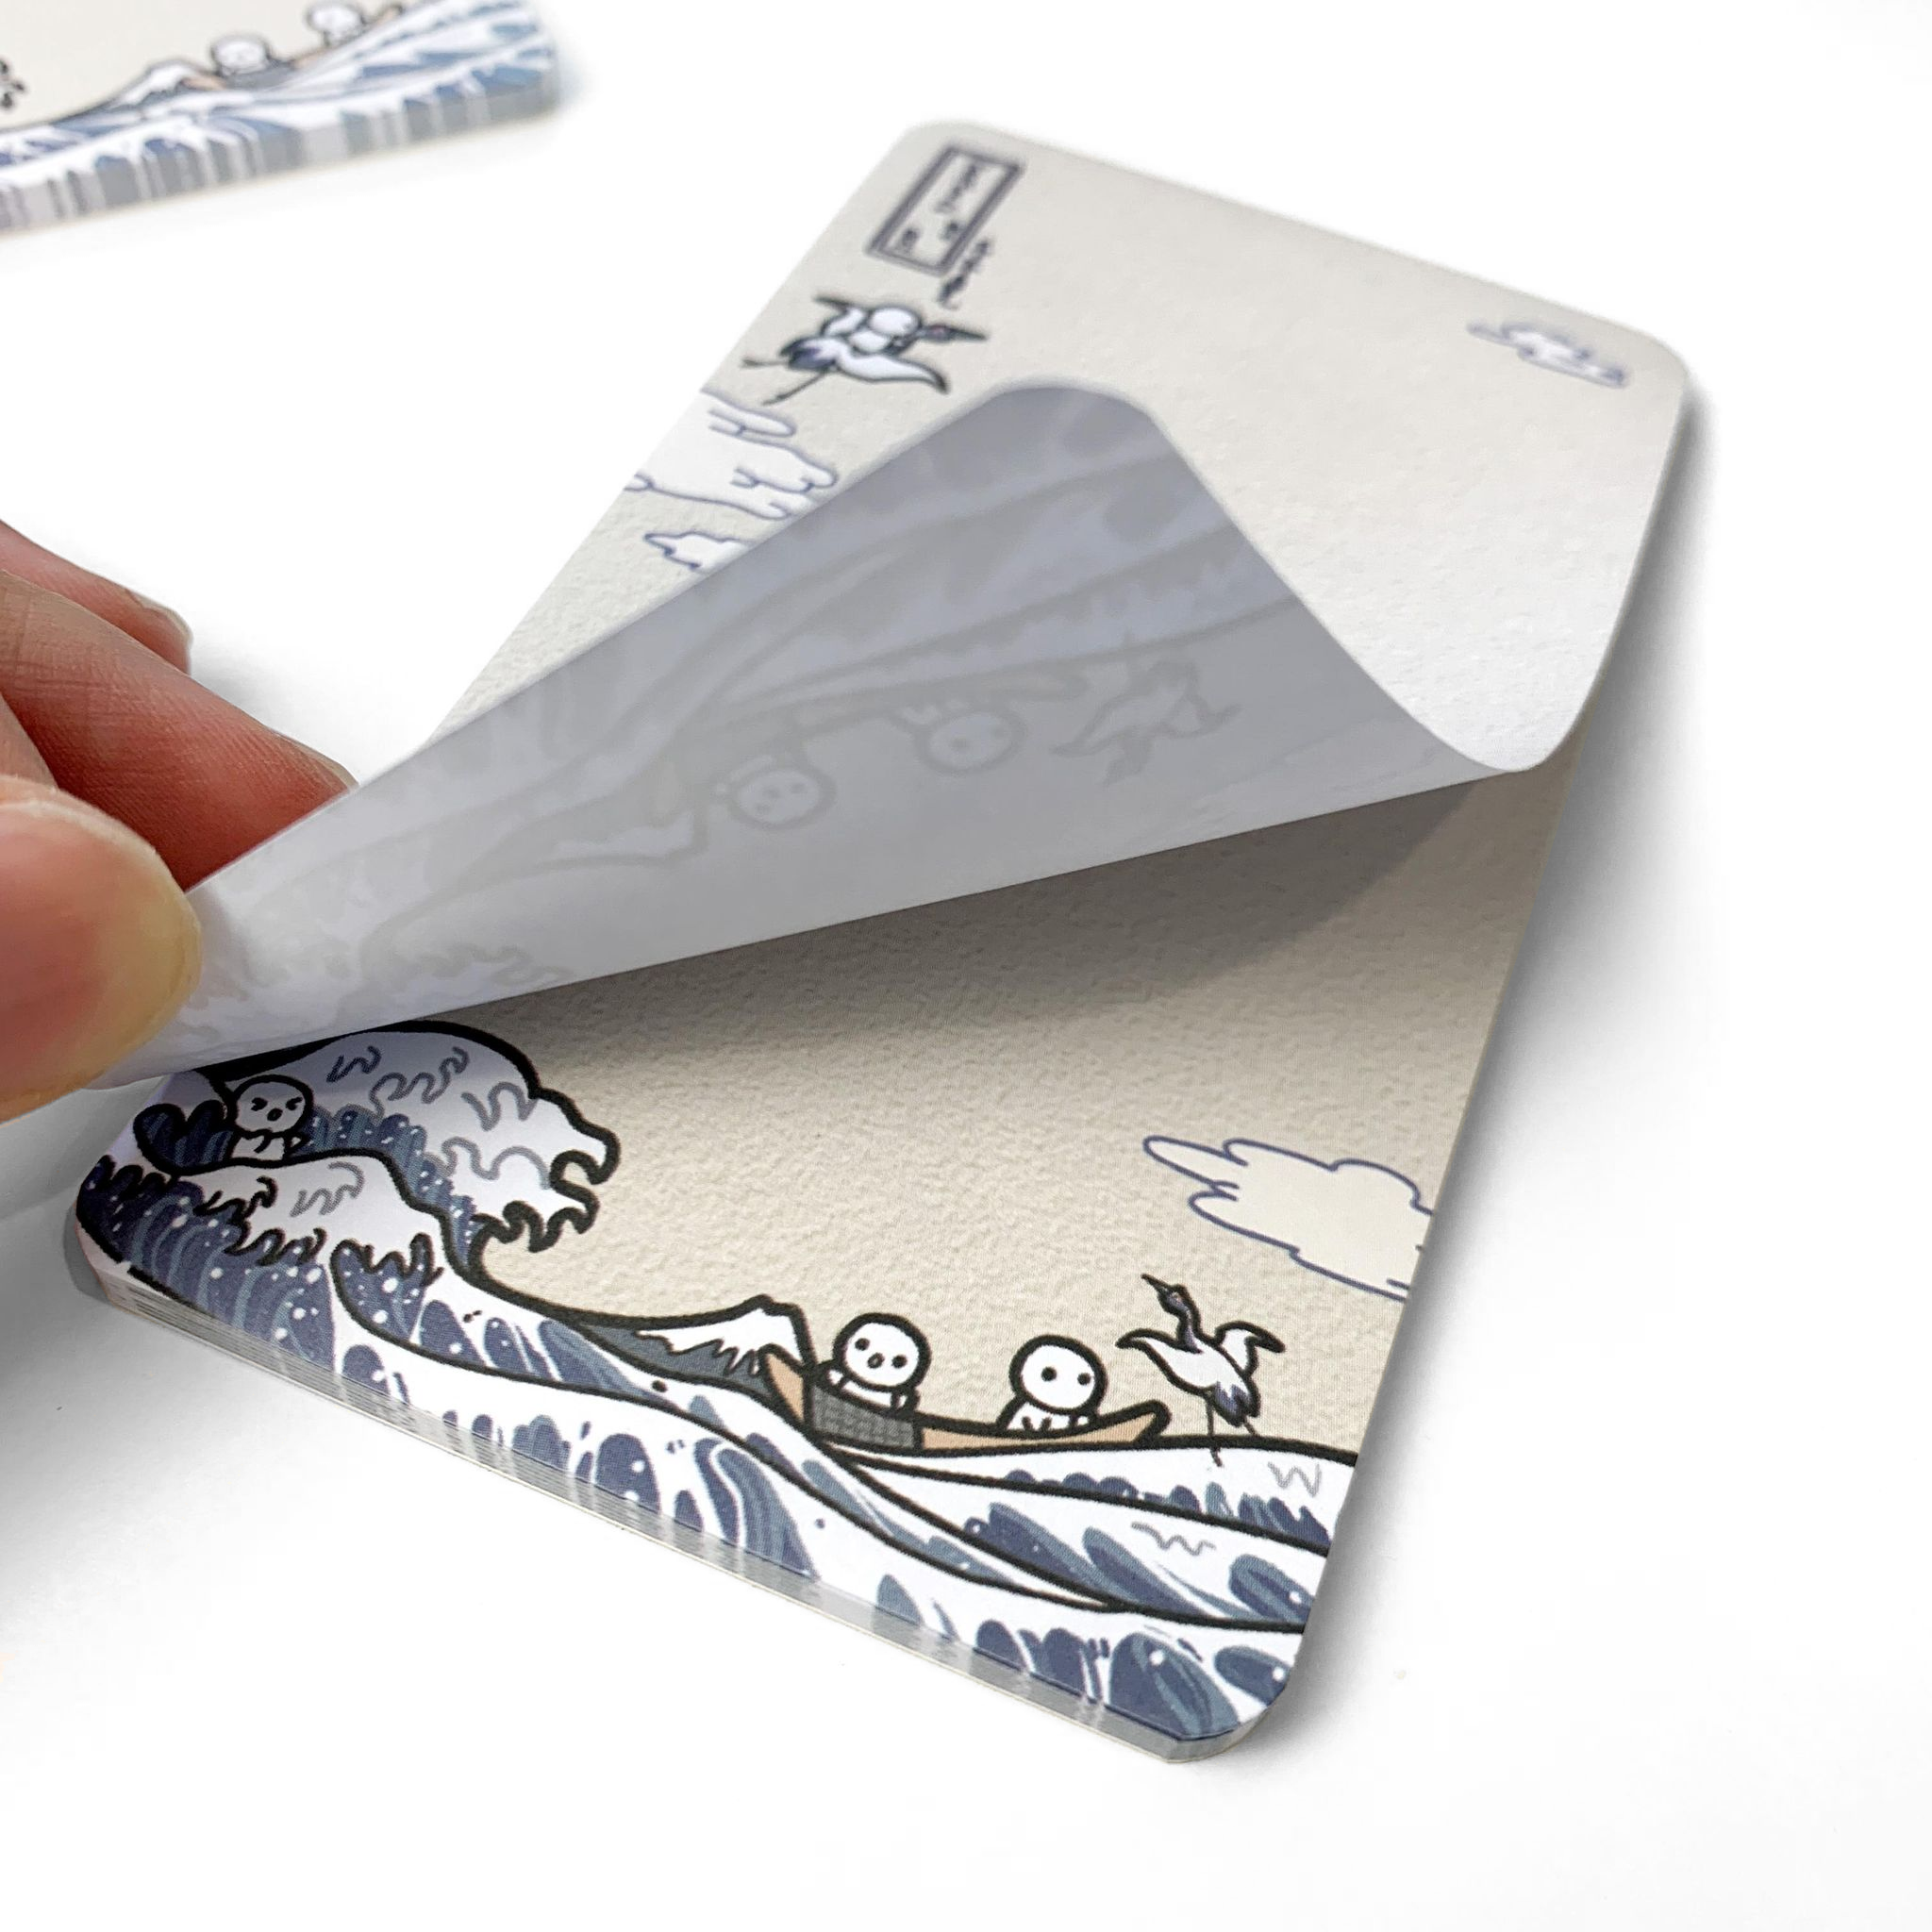 The Great Wave - Long Notepad